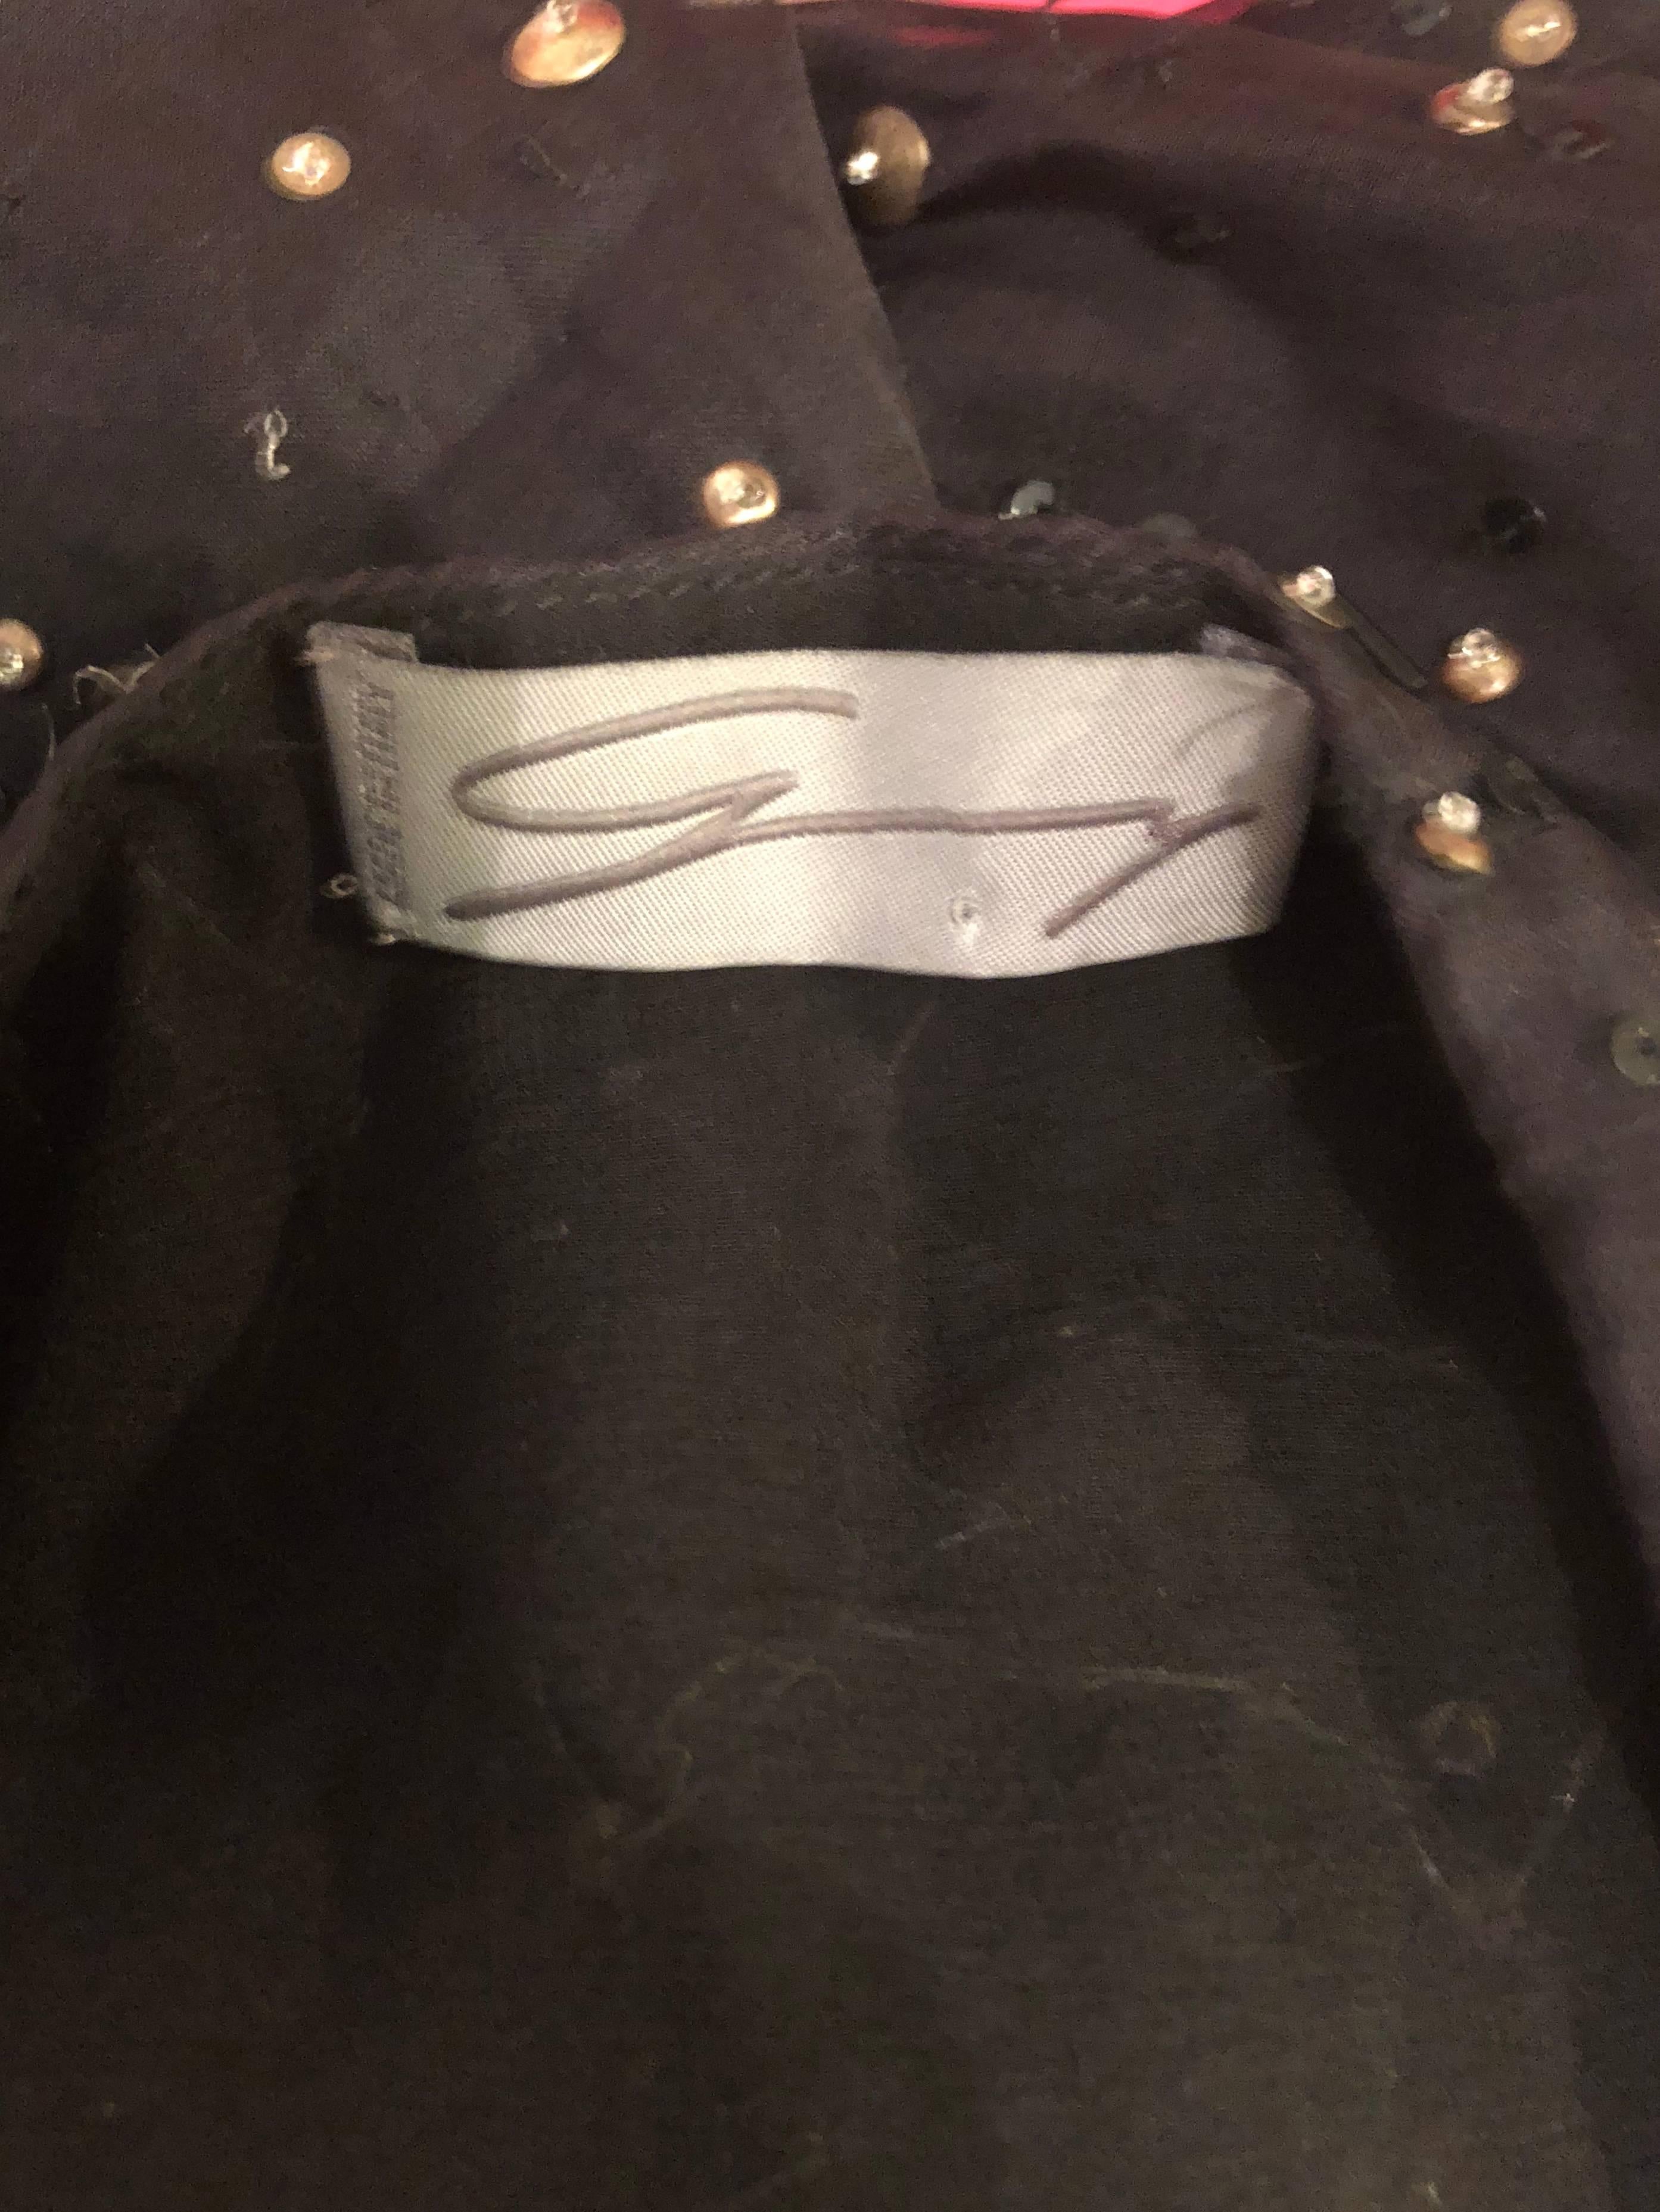 Beautiful 90s GENNY, by GIANNI VERSACE black silk chiffon semi sheer beaded blouse! Features hundreds of hand-sewn black beads and gold sequins throughout. Hidden zipper up the side with hook-and-eye closure. Can easily be dressed up or down.